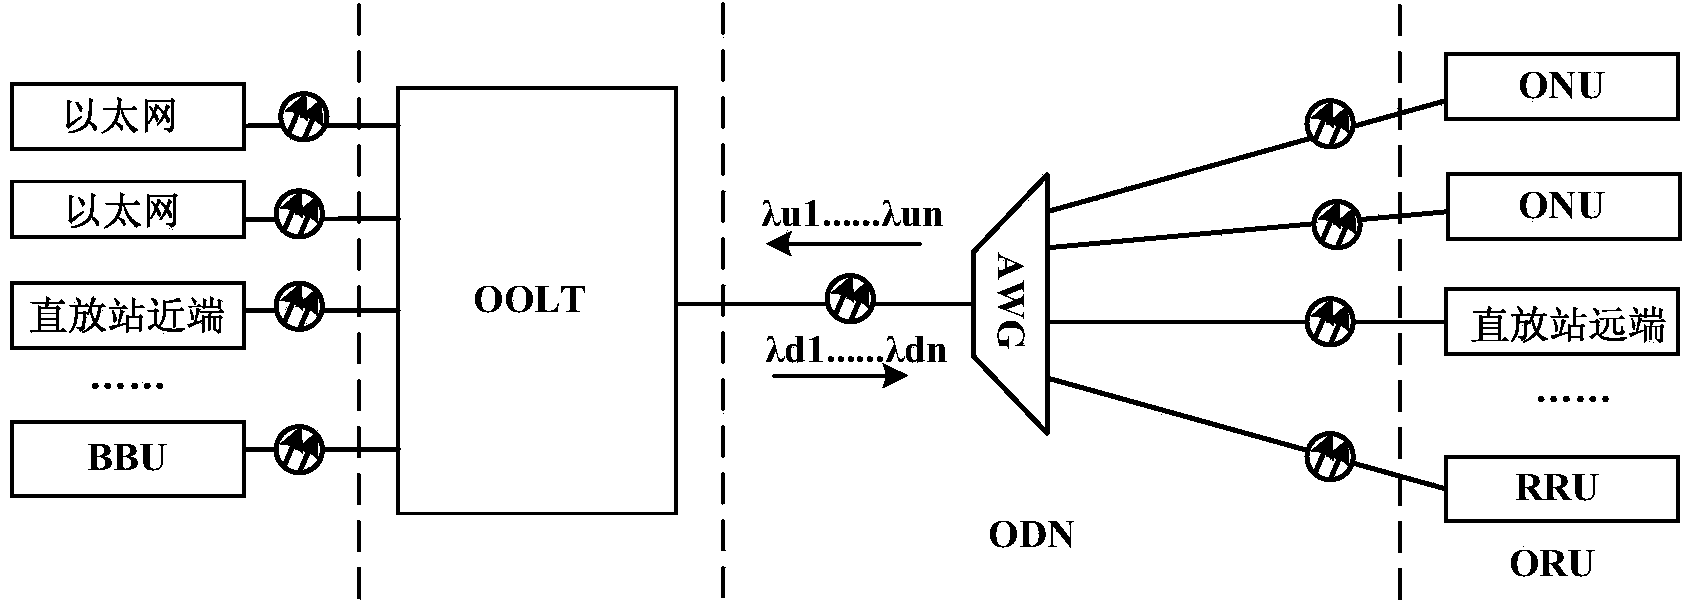 Open network architecture based on wavelength division PON system, and signal transmission method